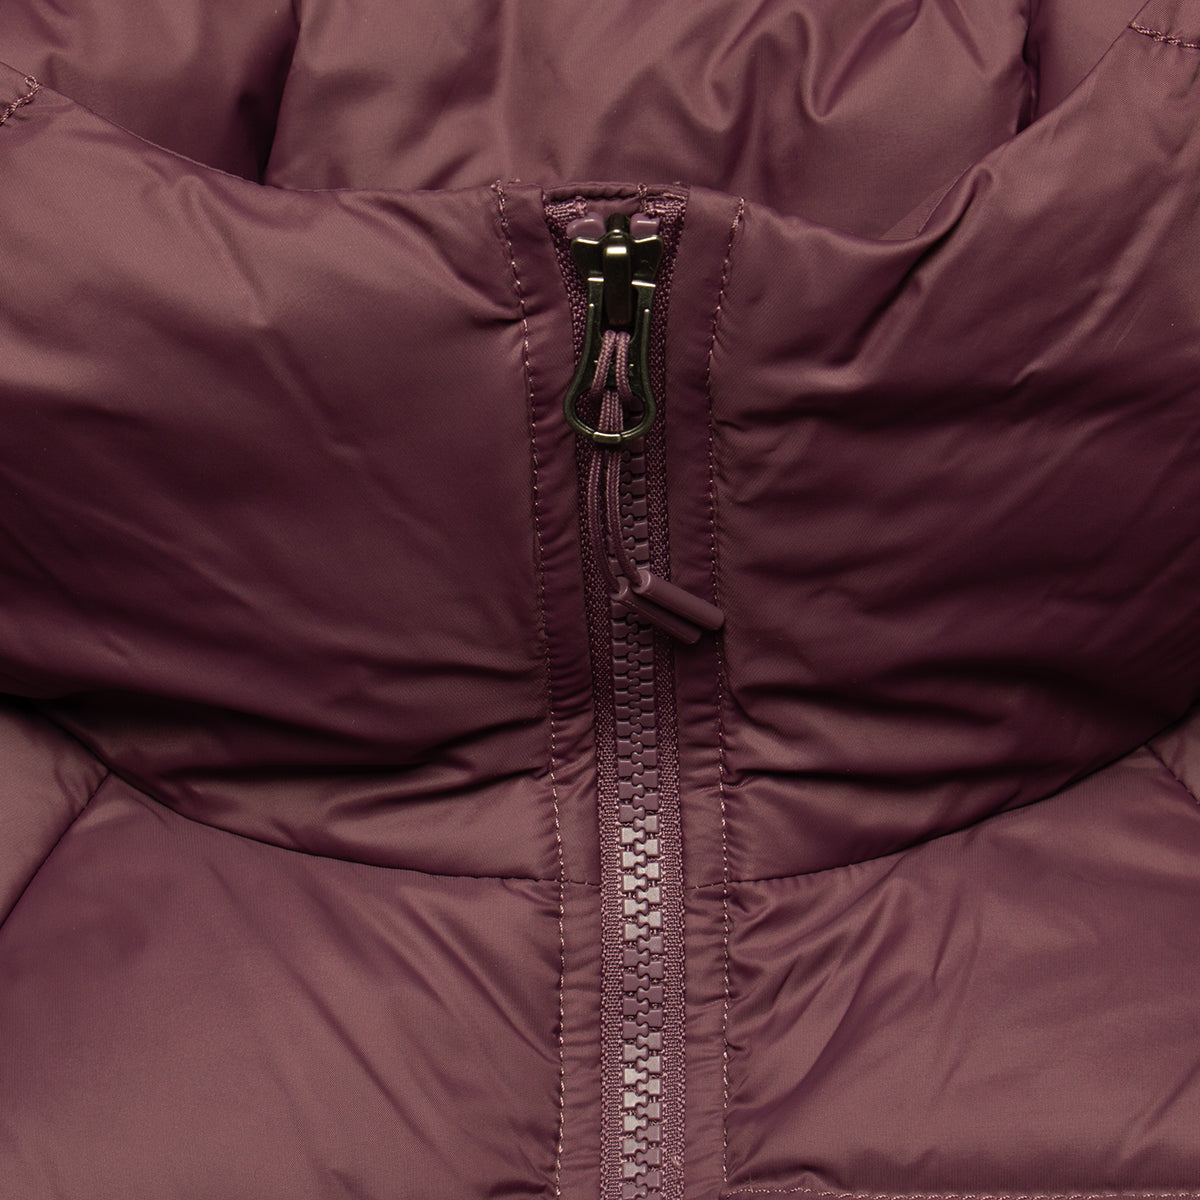 The North Face | Women's Hydrenalite Down Hooded Jacket Style # NF0A5GGG1NI1 Color : Midnight Mauve